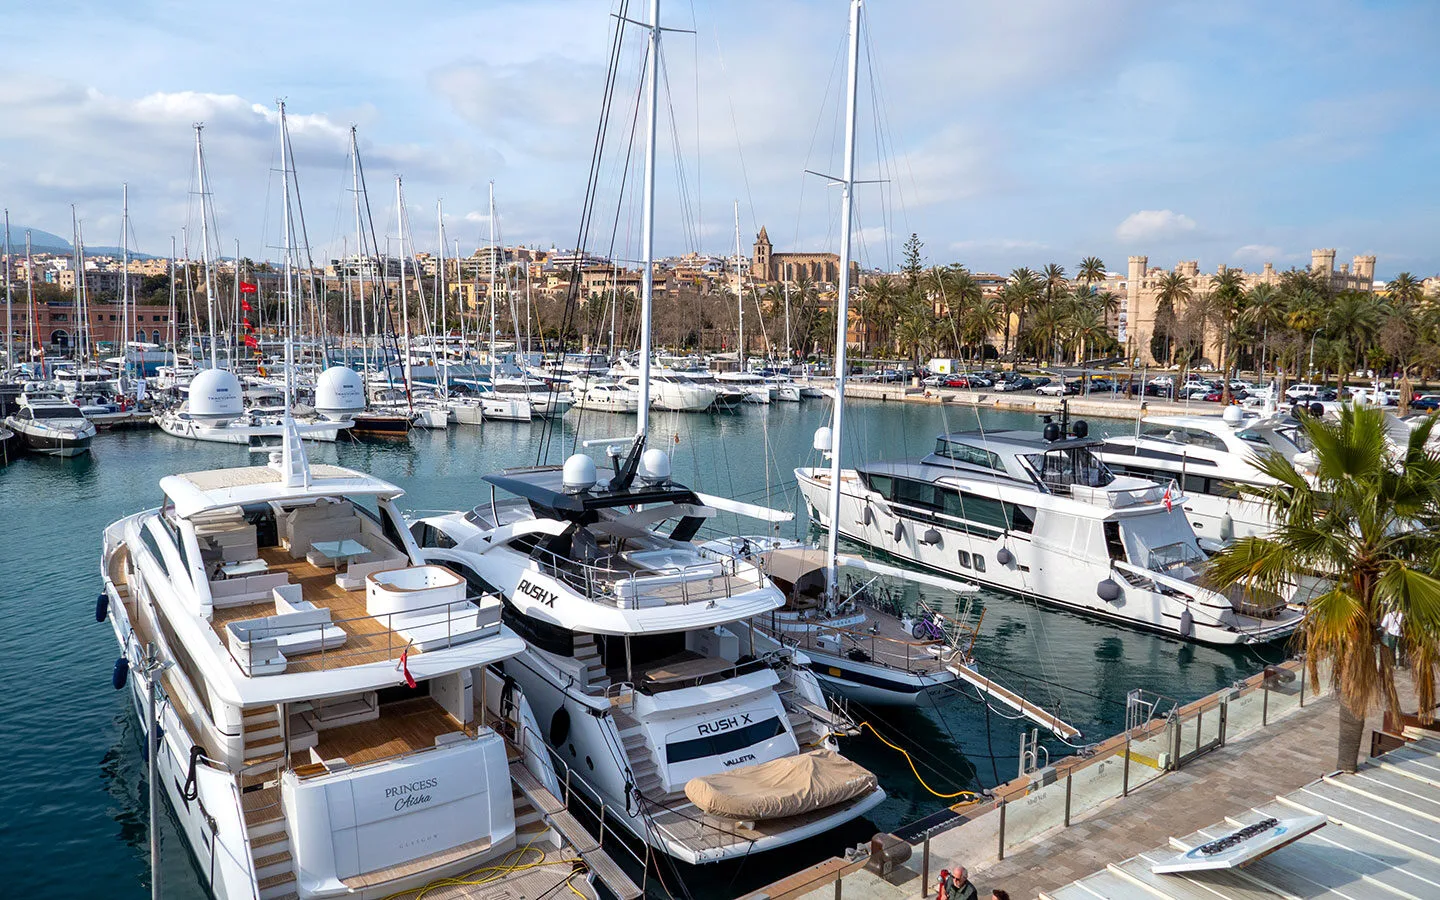 Boats in the port in Palma